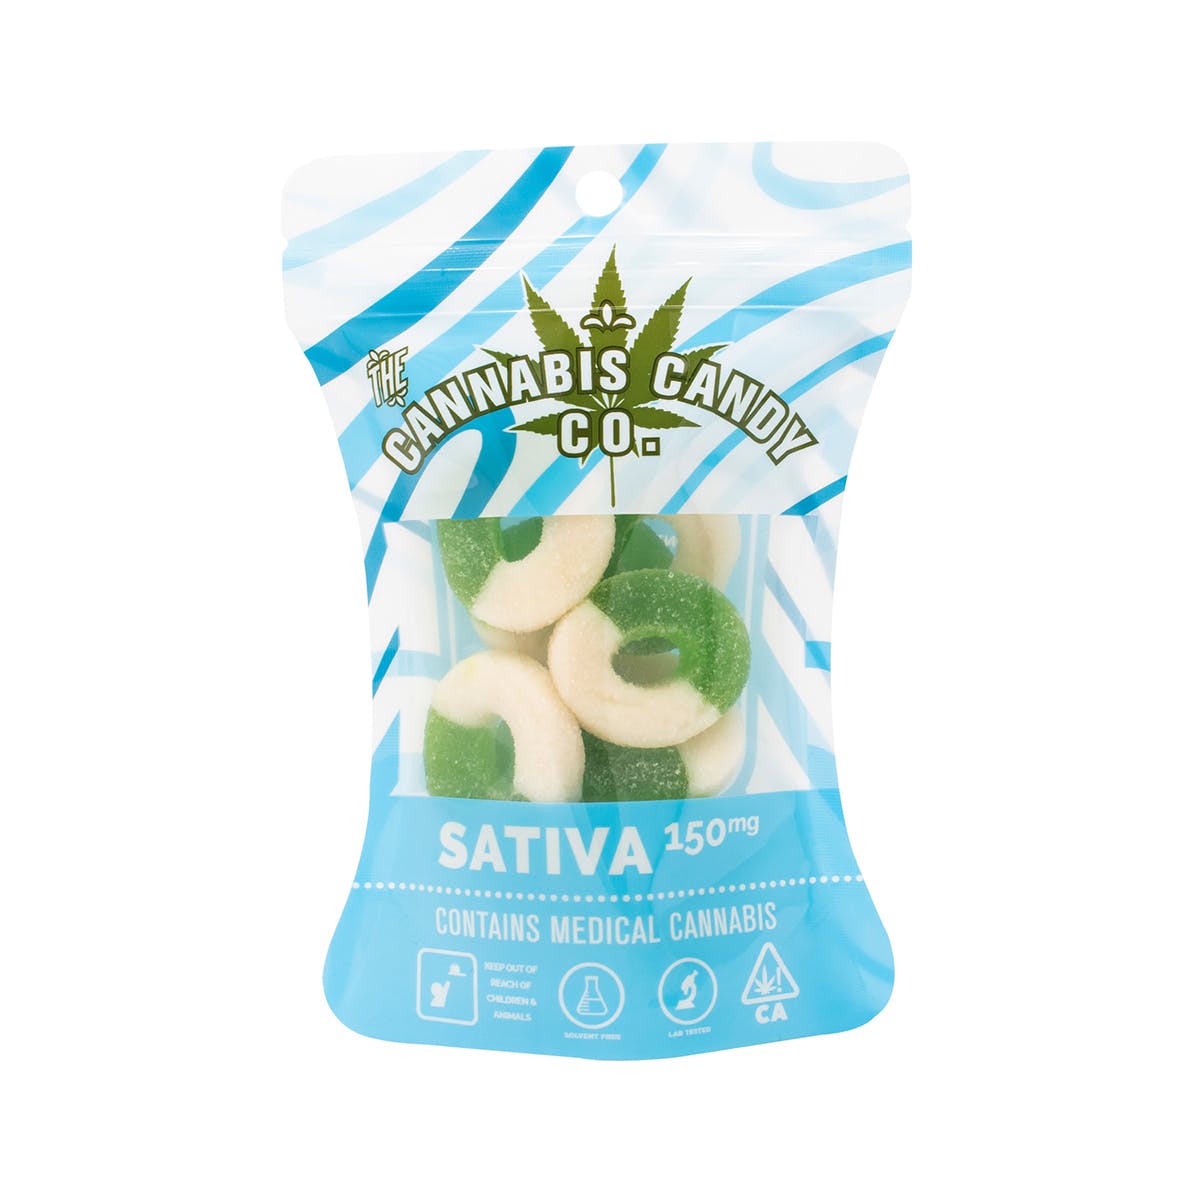 edible-the-cannabis-candy-co-rings-apple-150mg-sativa